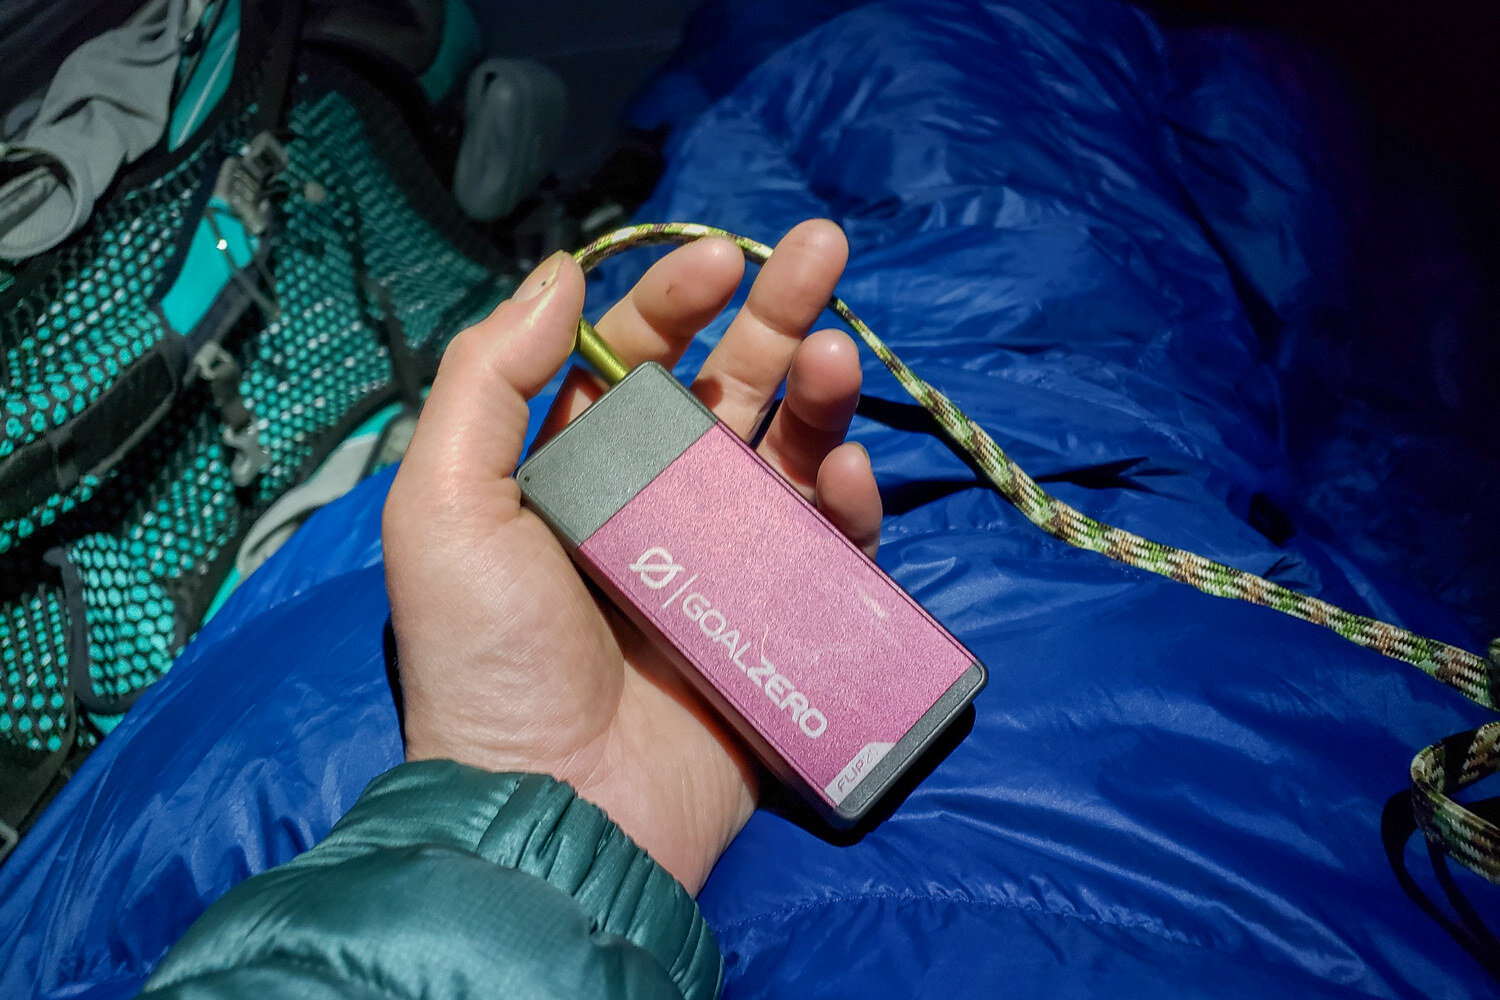 A portable power bank, like the Goal Zero Flip, will keep your phone & electronics juiced up while backpacking.